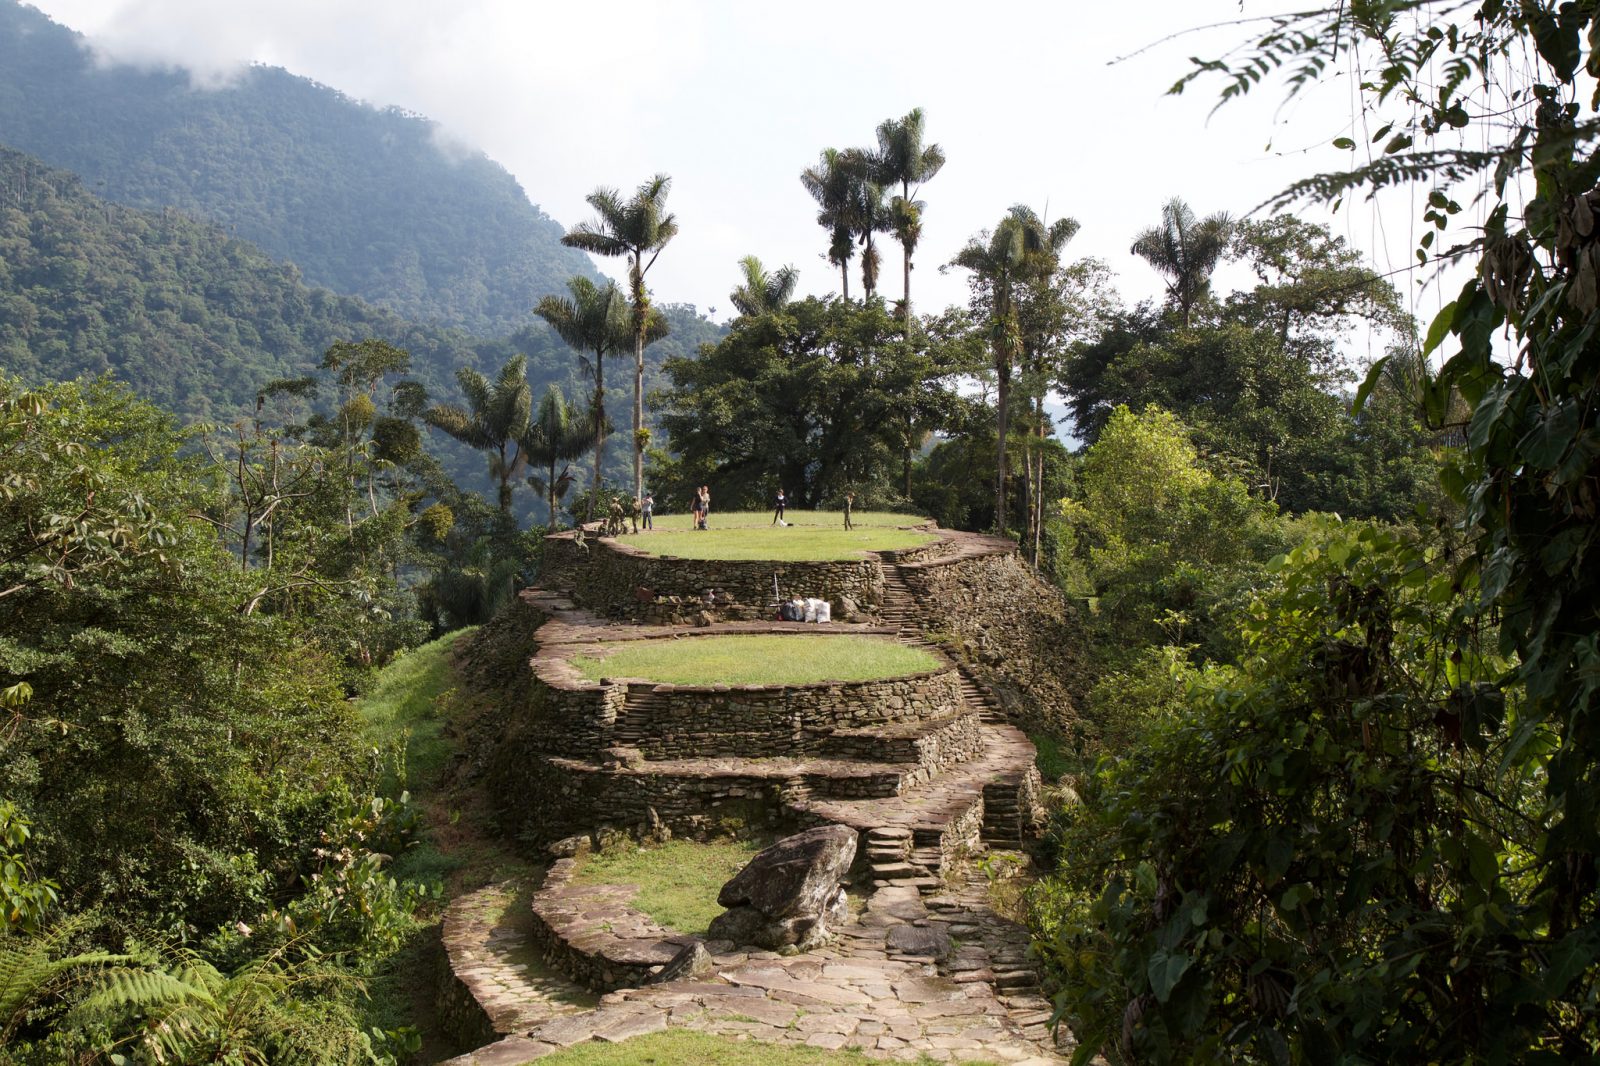 Trek to Lost City, Colombia